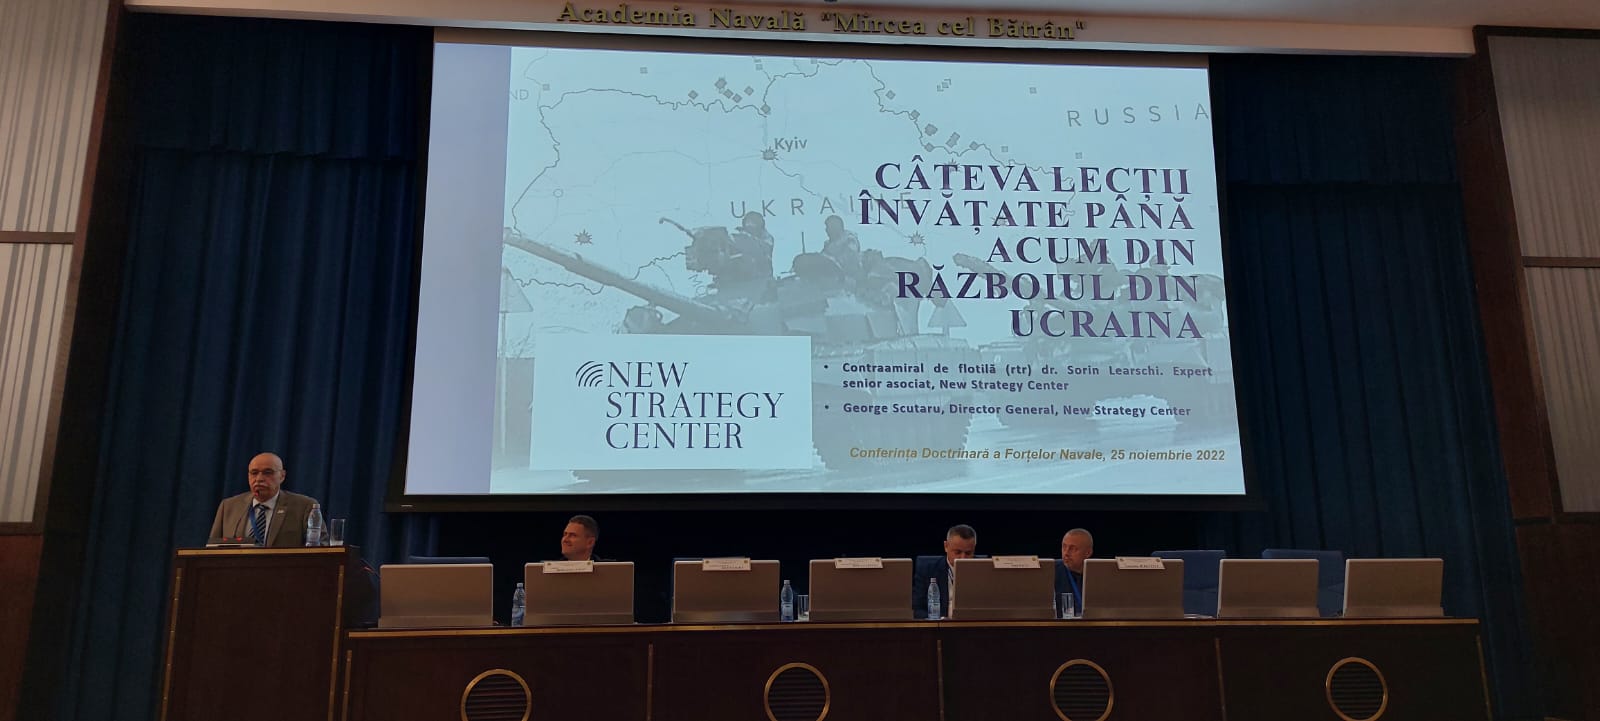 NSC at the conference of the Romanian Naval Forces